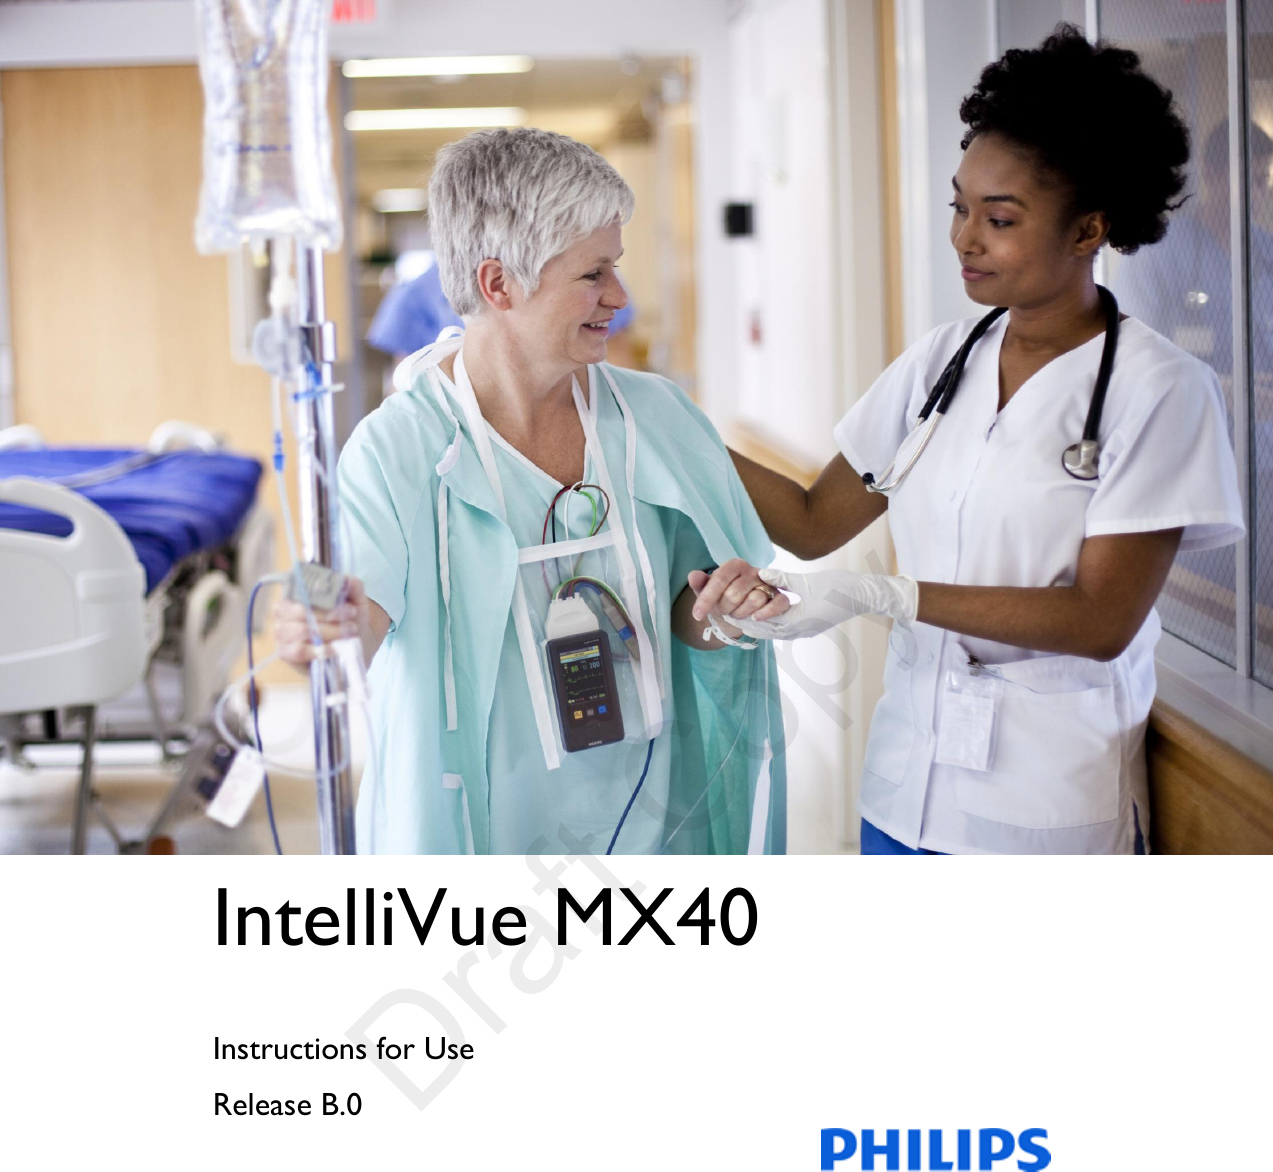  IntelliVue MX40  Instructions for Use               Release B.0     Draft Copy